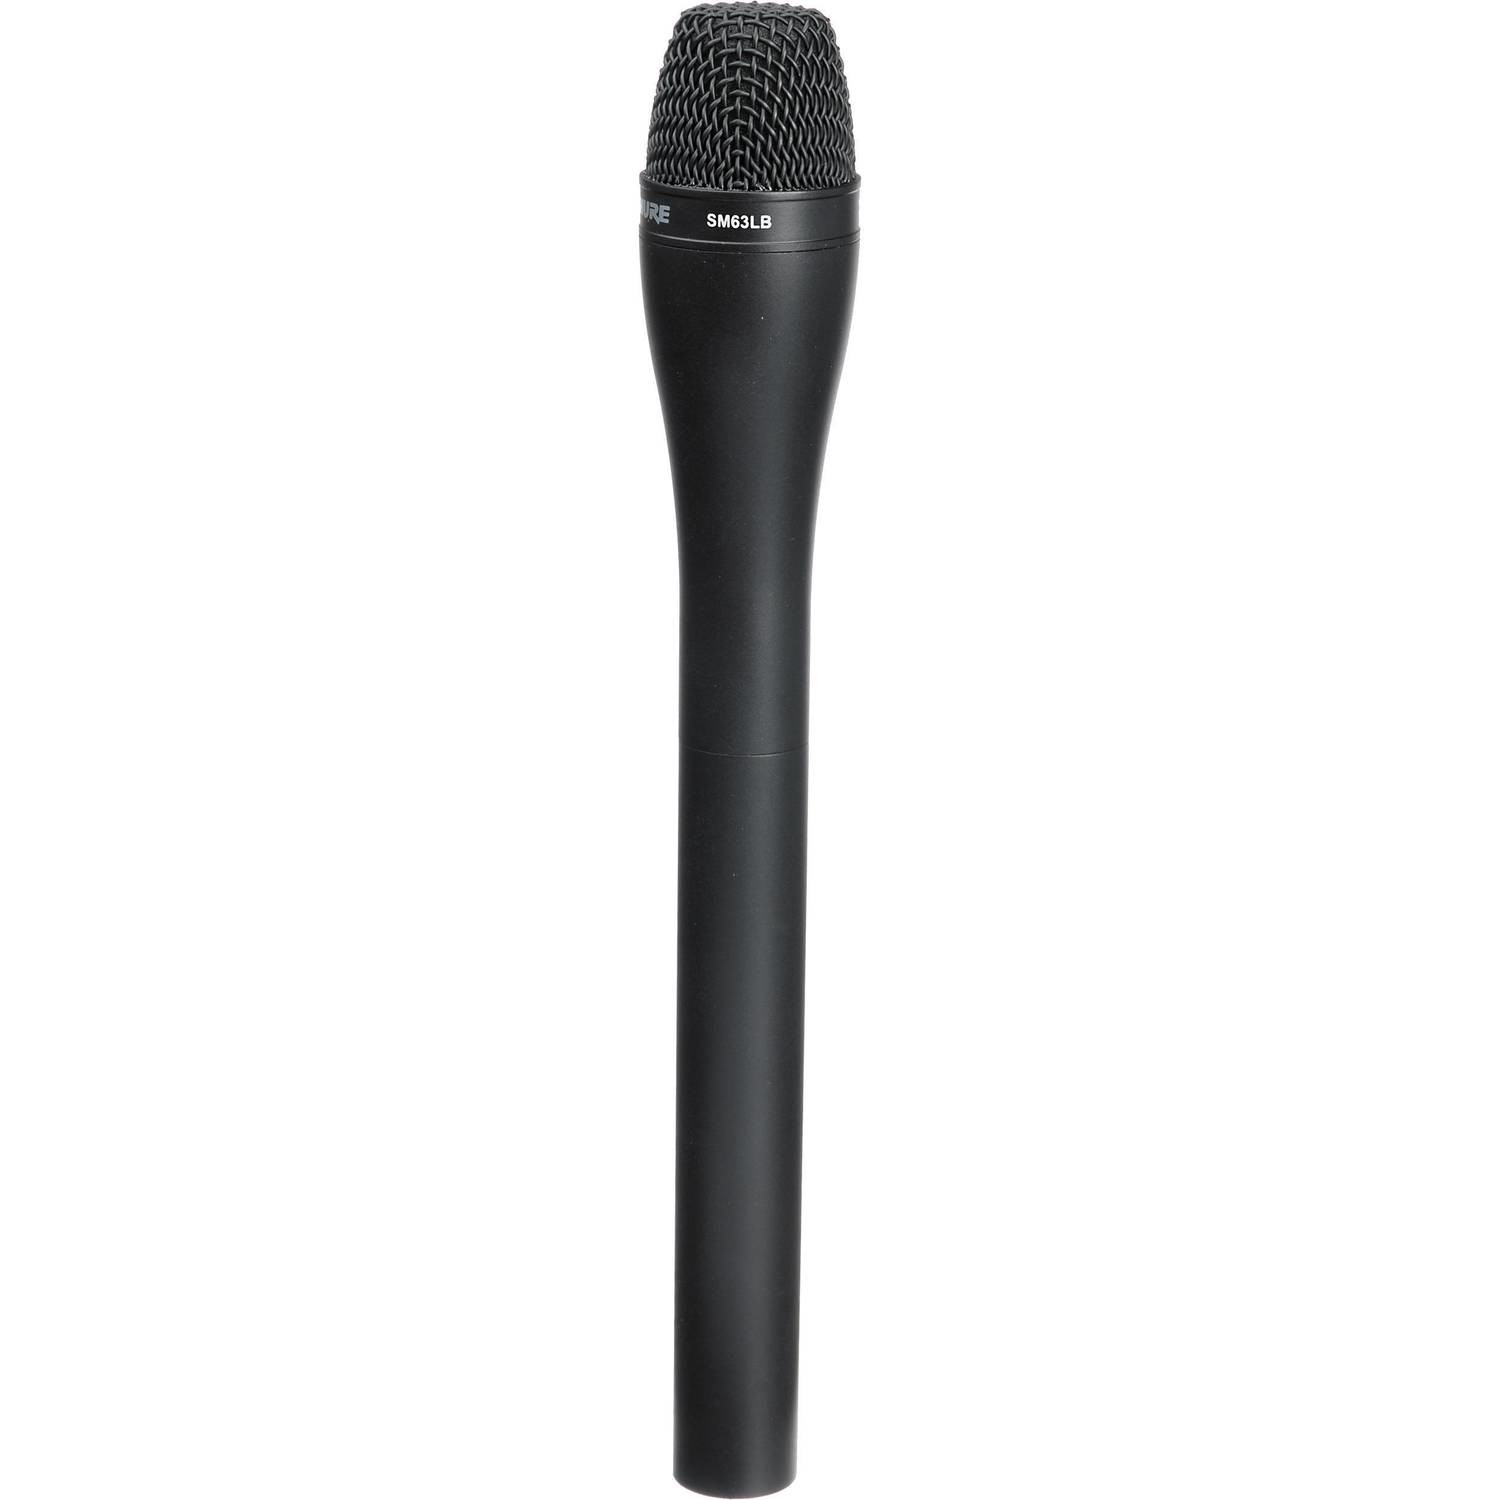 Shure SM63reporting microphone (Champagne color)